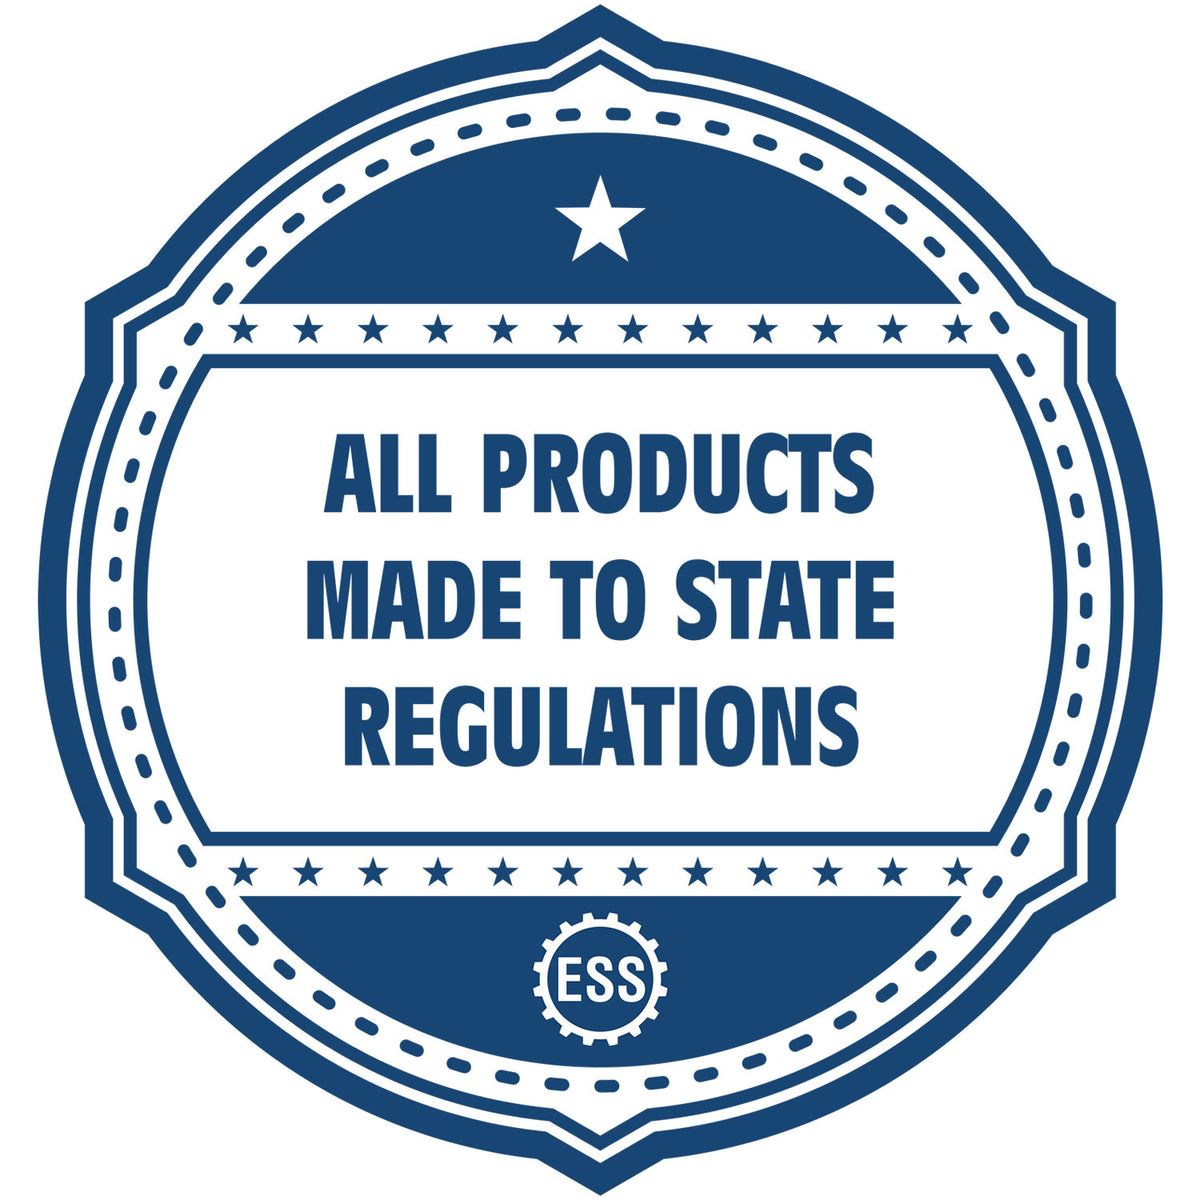 An icon or badge element for the State of North Dakota Extended Long Reach Engineer Seal showing that this product is made in compliance with state regulations.